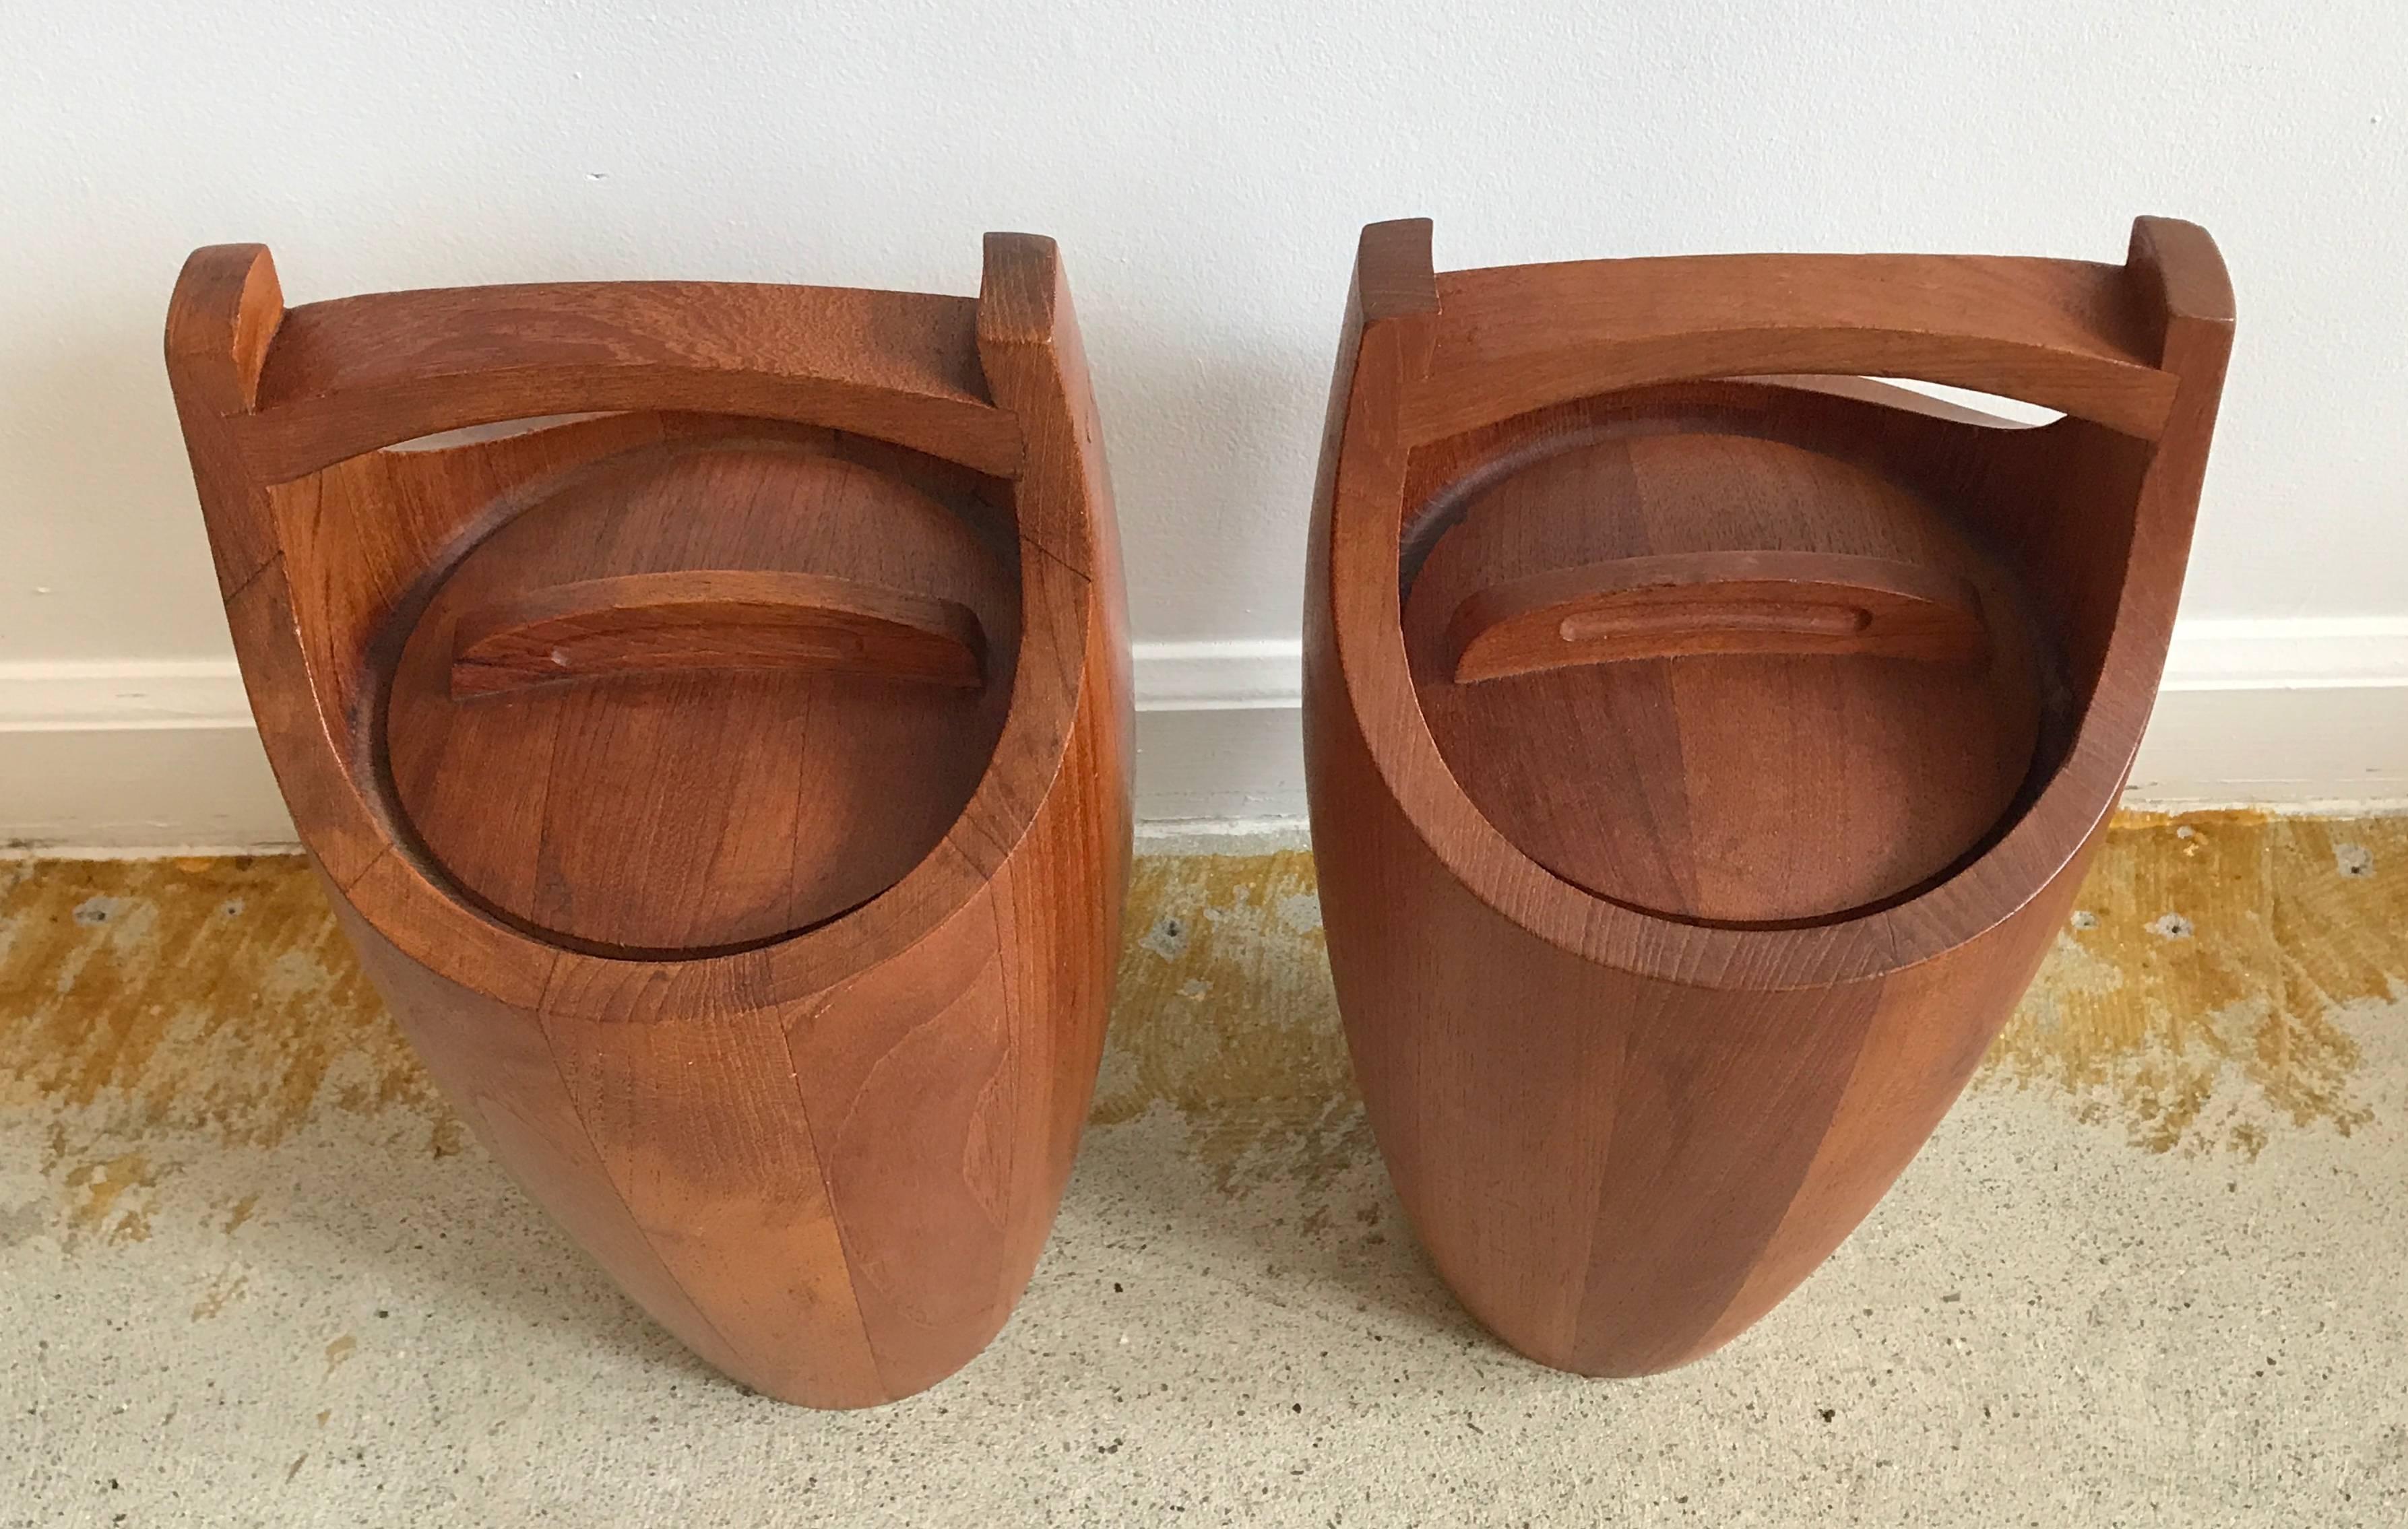 Iconic pair of teak ice buckets by Jens Quistgaard for Dansk, Denmark. One with red insert the other in black.